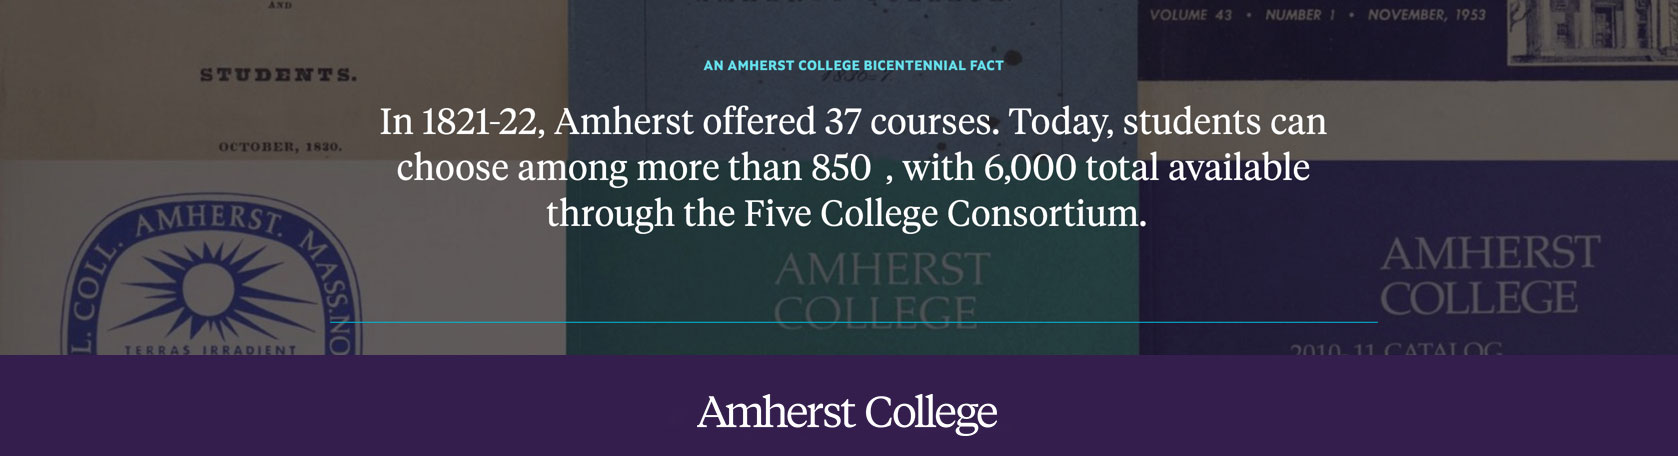 A collage of Amherst College course catalogs